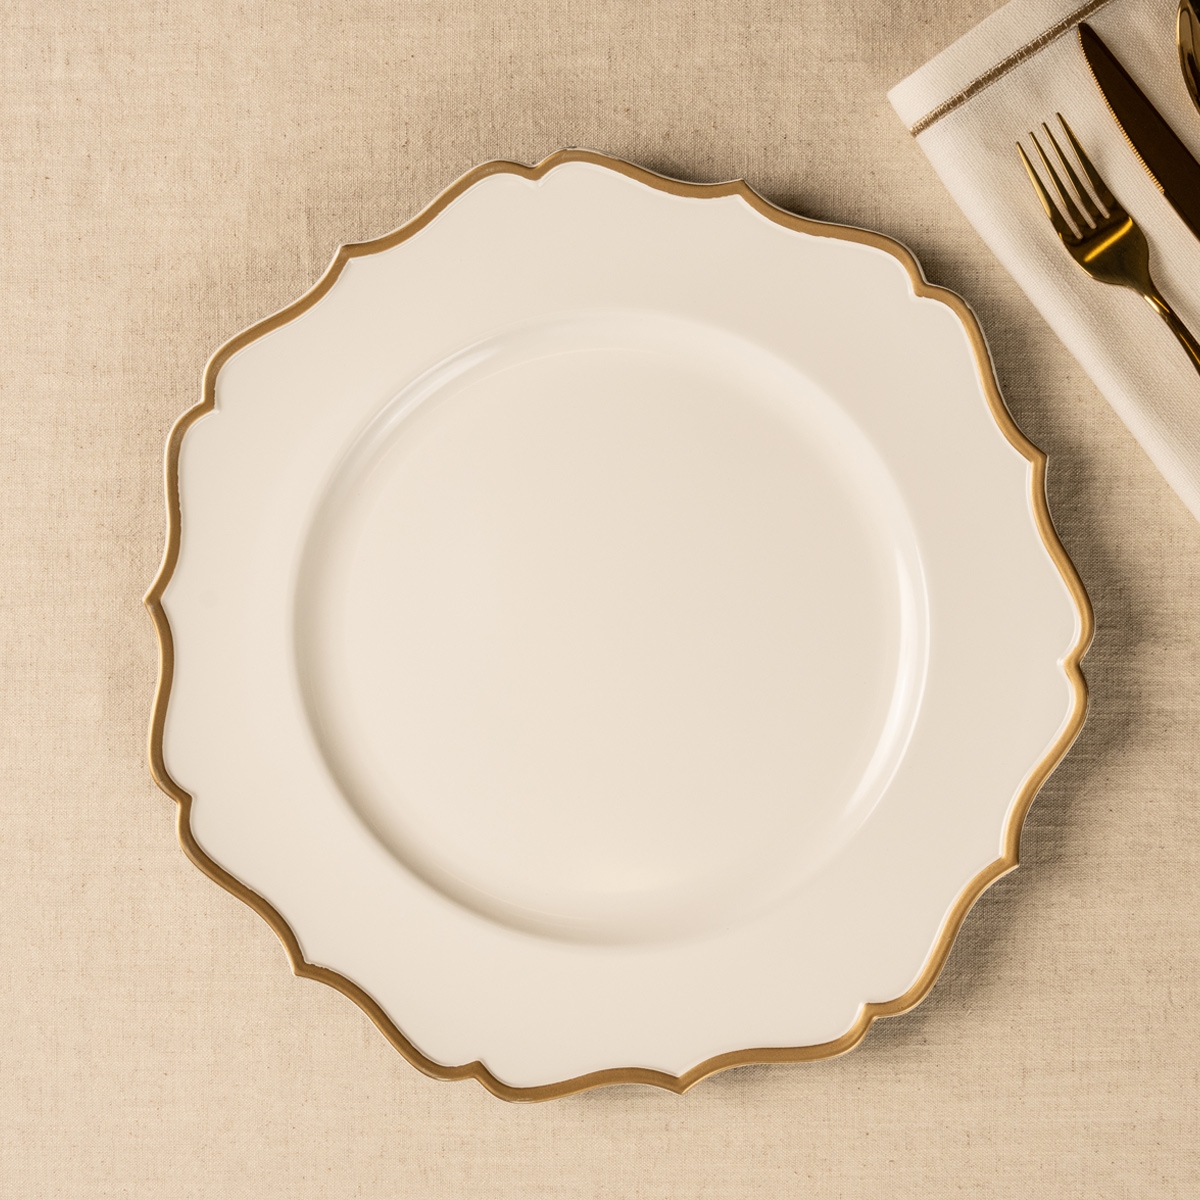 Buy Mx charger plate white 33x33x1. 5 cm in Kuwait